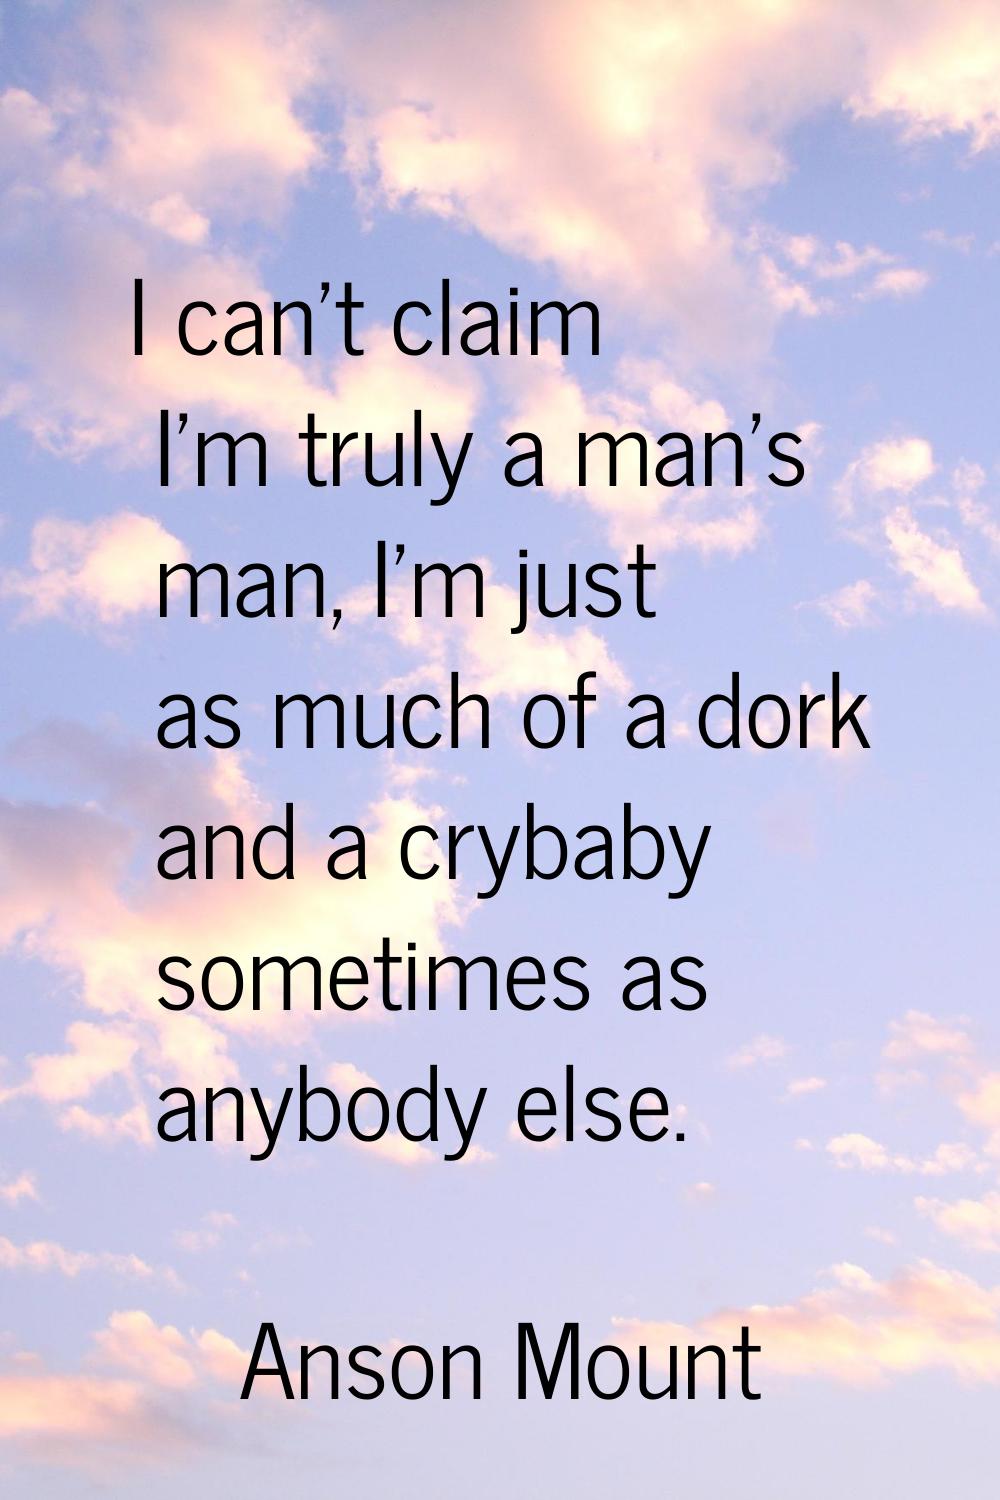 I can't claim I'm truly a man's man, I'm just as much of a dork and a crybaby sometimes as anybody 